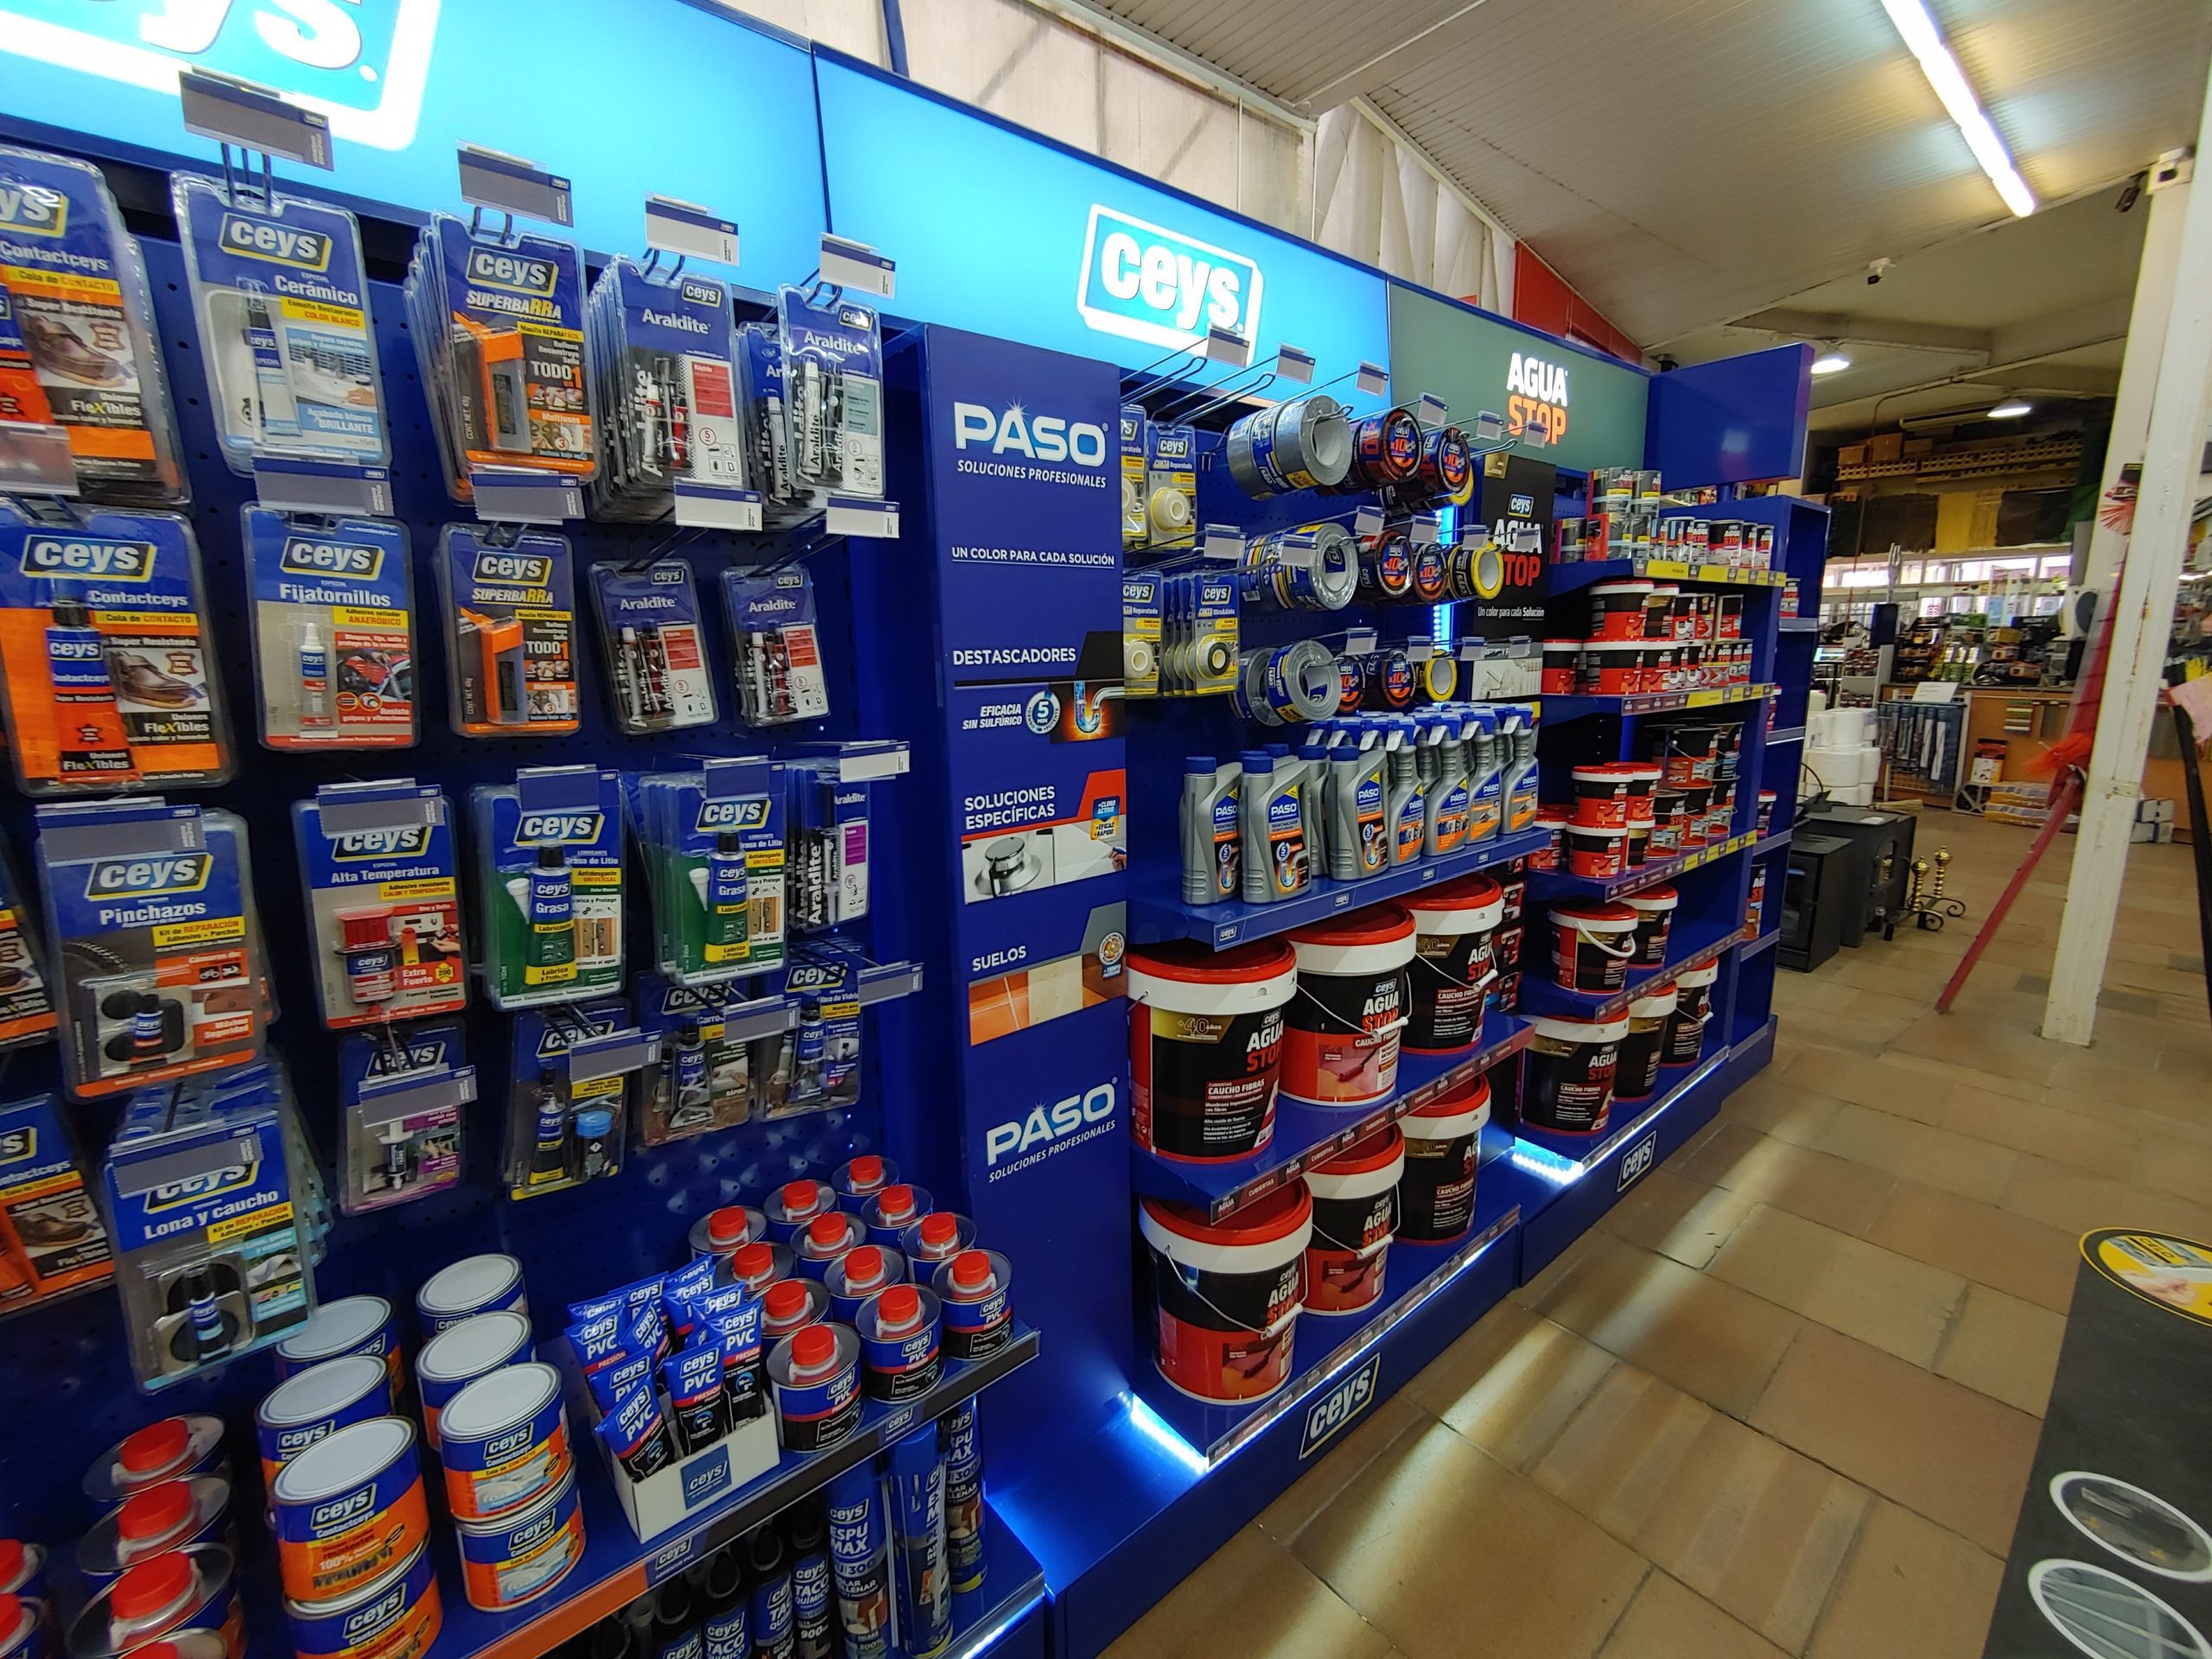 Ceys line in hardware store. Ceys products.